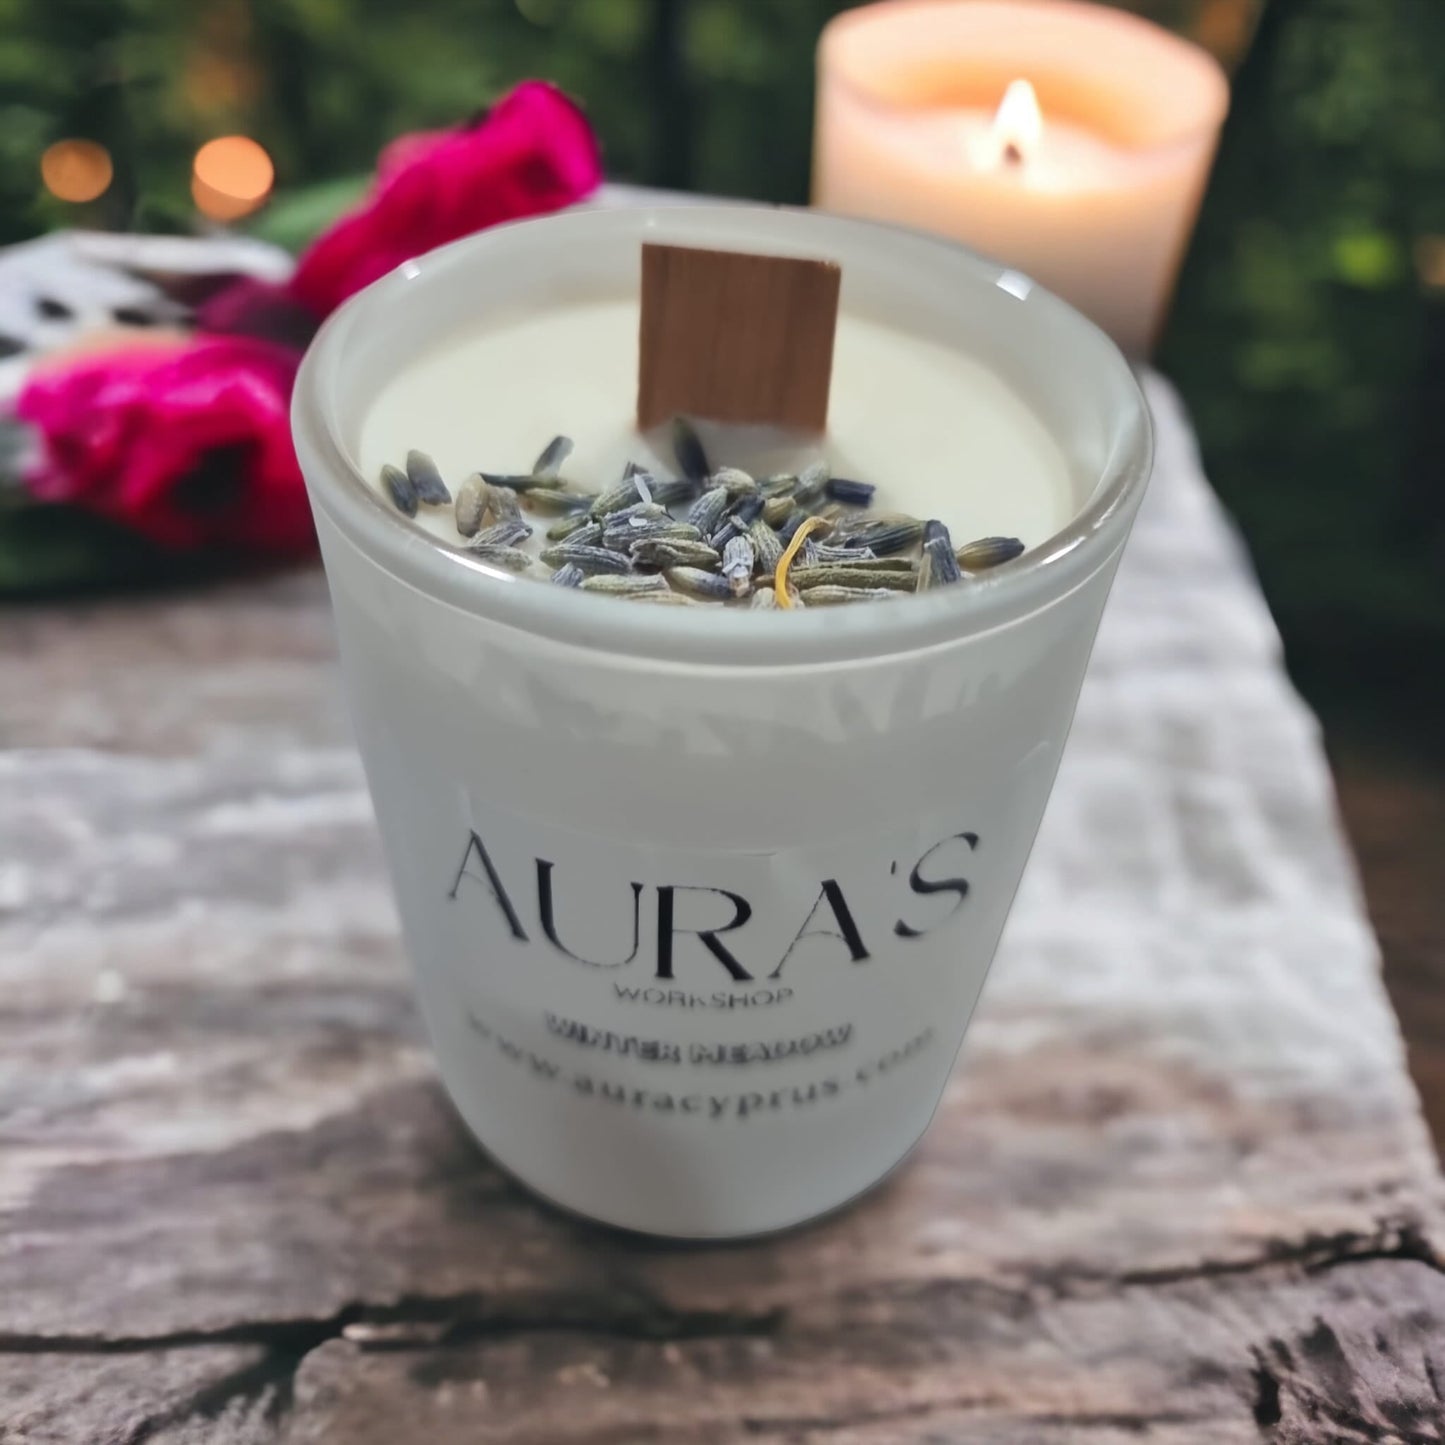 Winter Meadow Scent Small Candle - Auras Workshop  -  Candles -   - Cyprus & Greece - Wholesale - Retail #